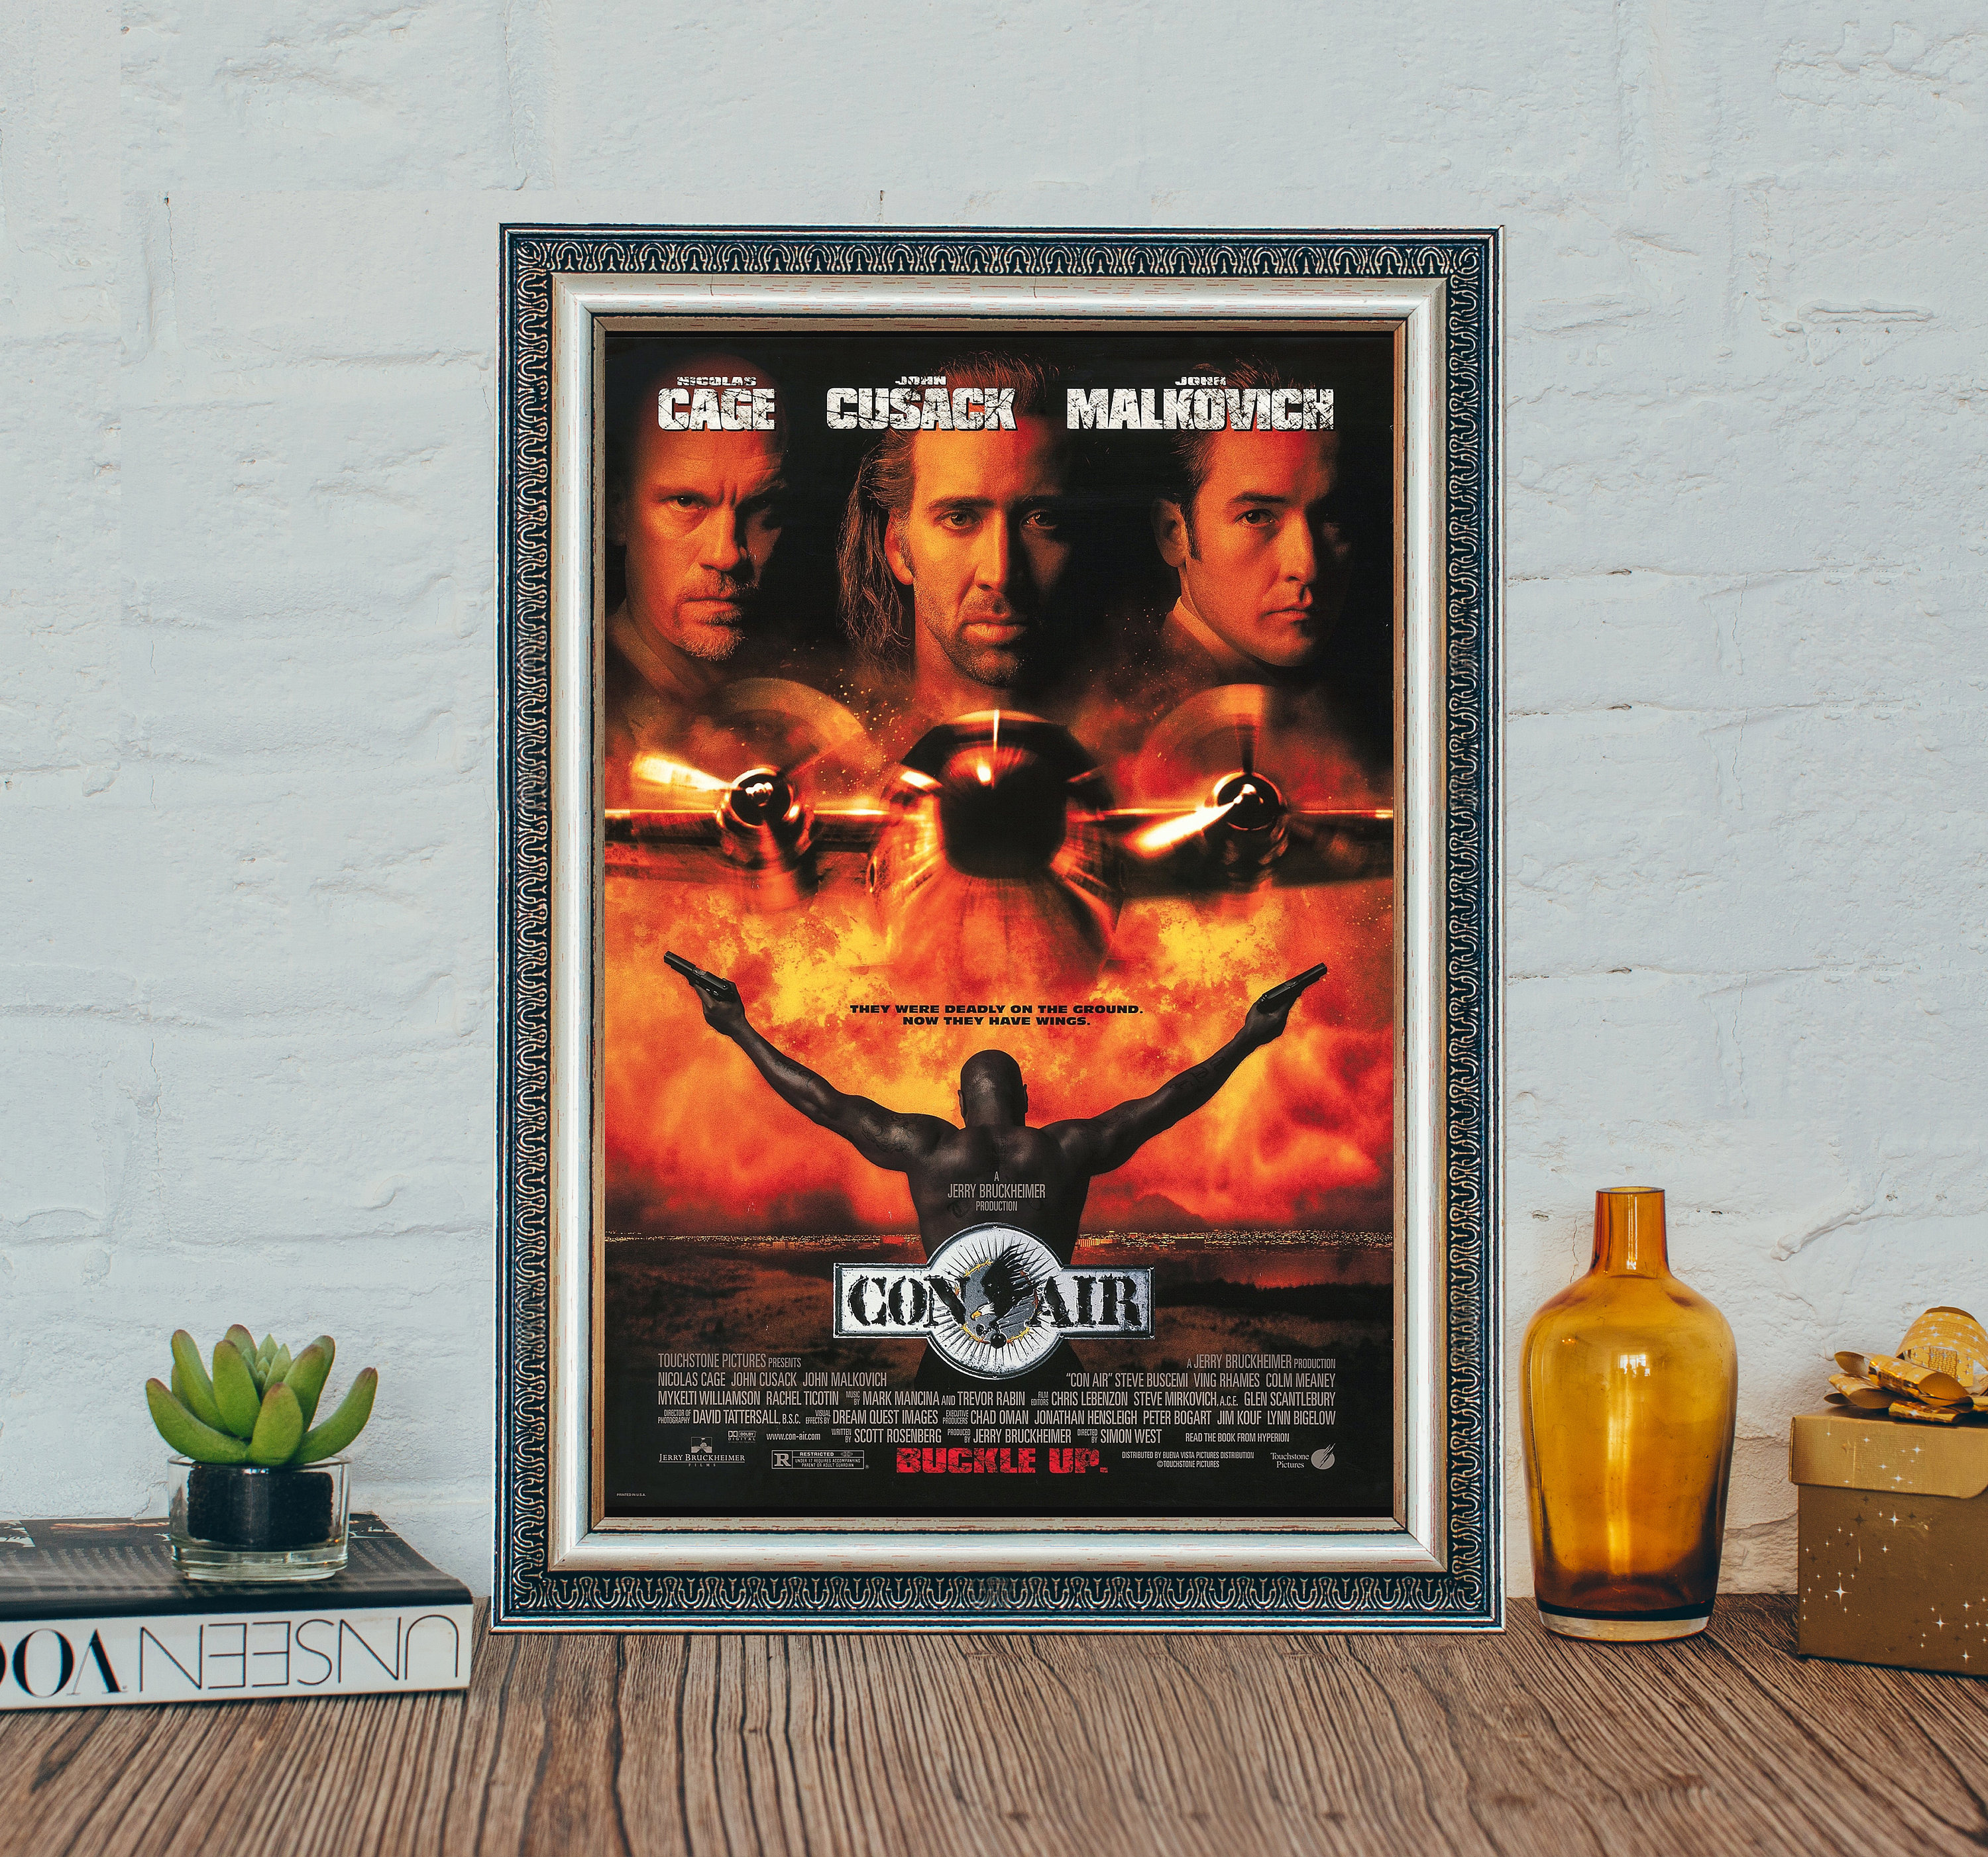 Con Air - Movie Poster / Print (Cage & Cusack & MalkoVIch) (Size: 27 X 39)